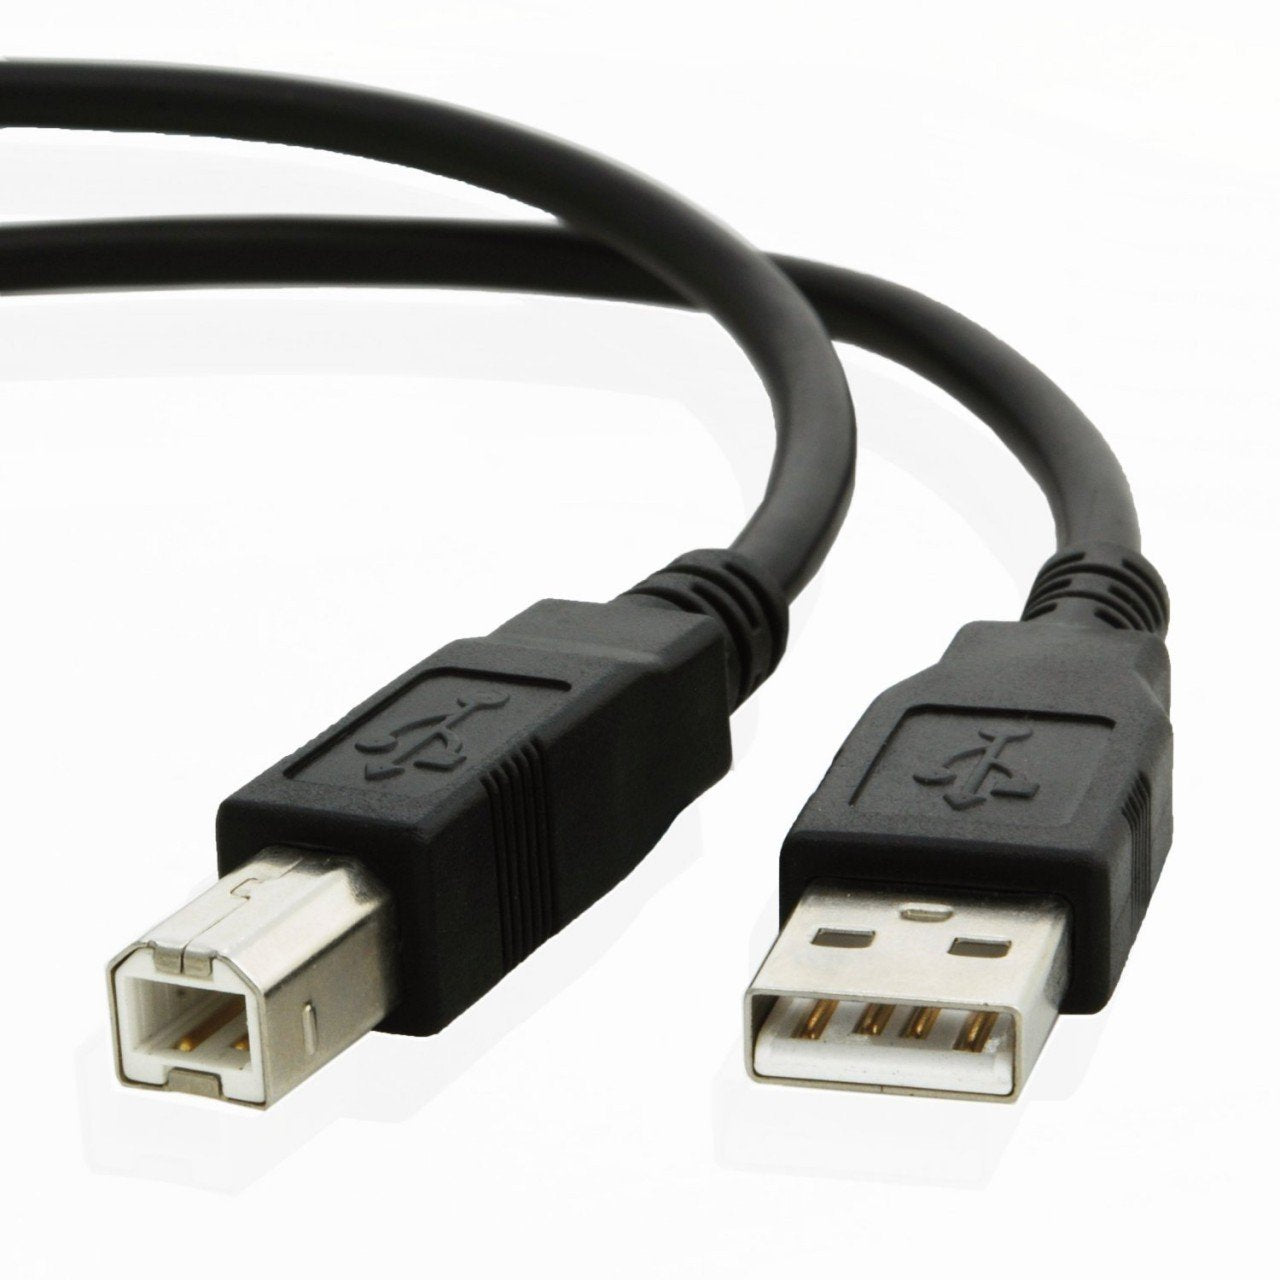 USB cable for Hp OFFICEJET 4650